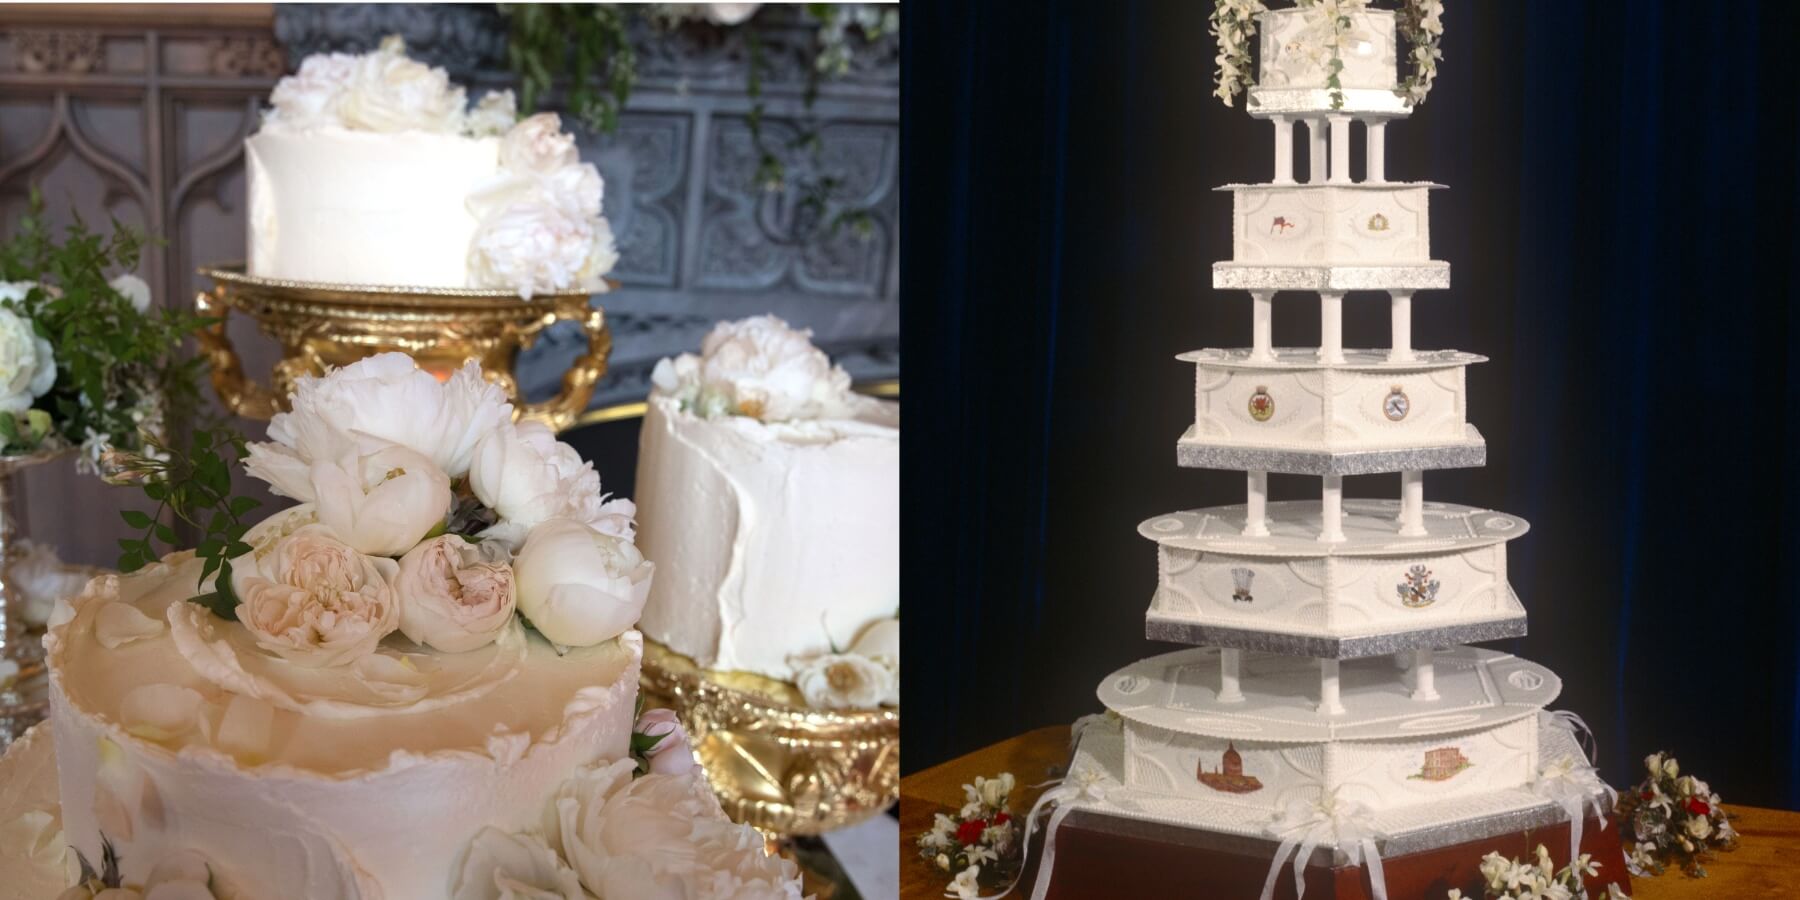 Meghan Markle and Prince Harry's wedding cake in a side-by-side photo with Princess Diana and Prince Charles'.